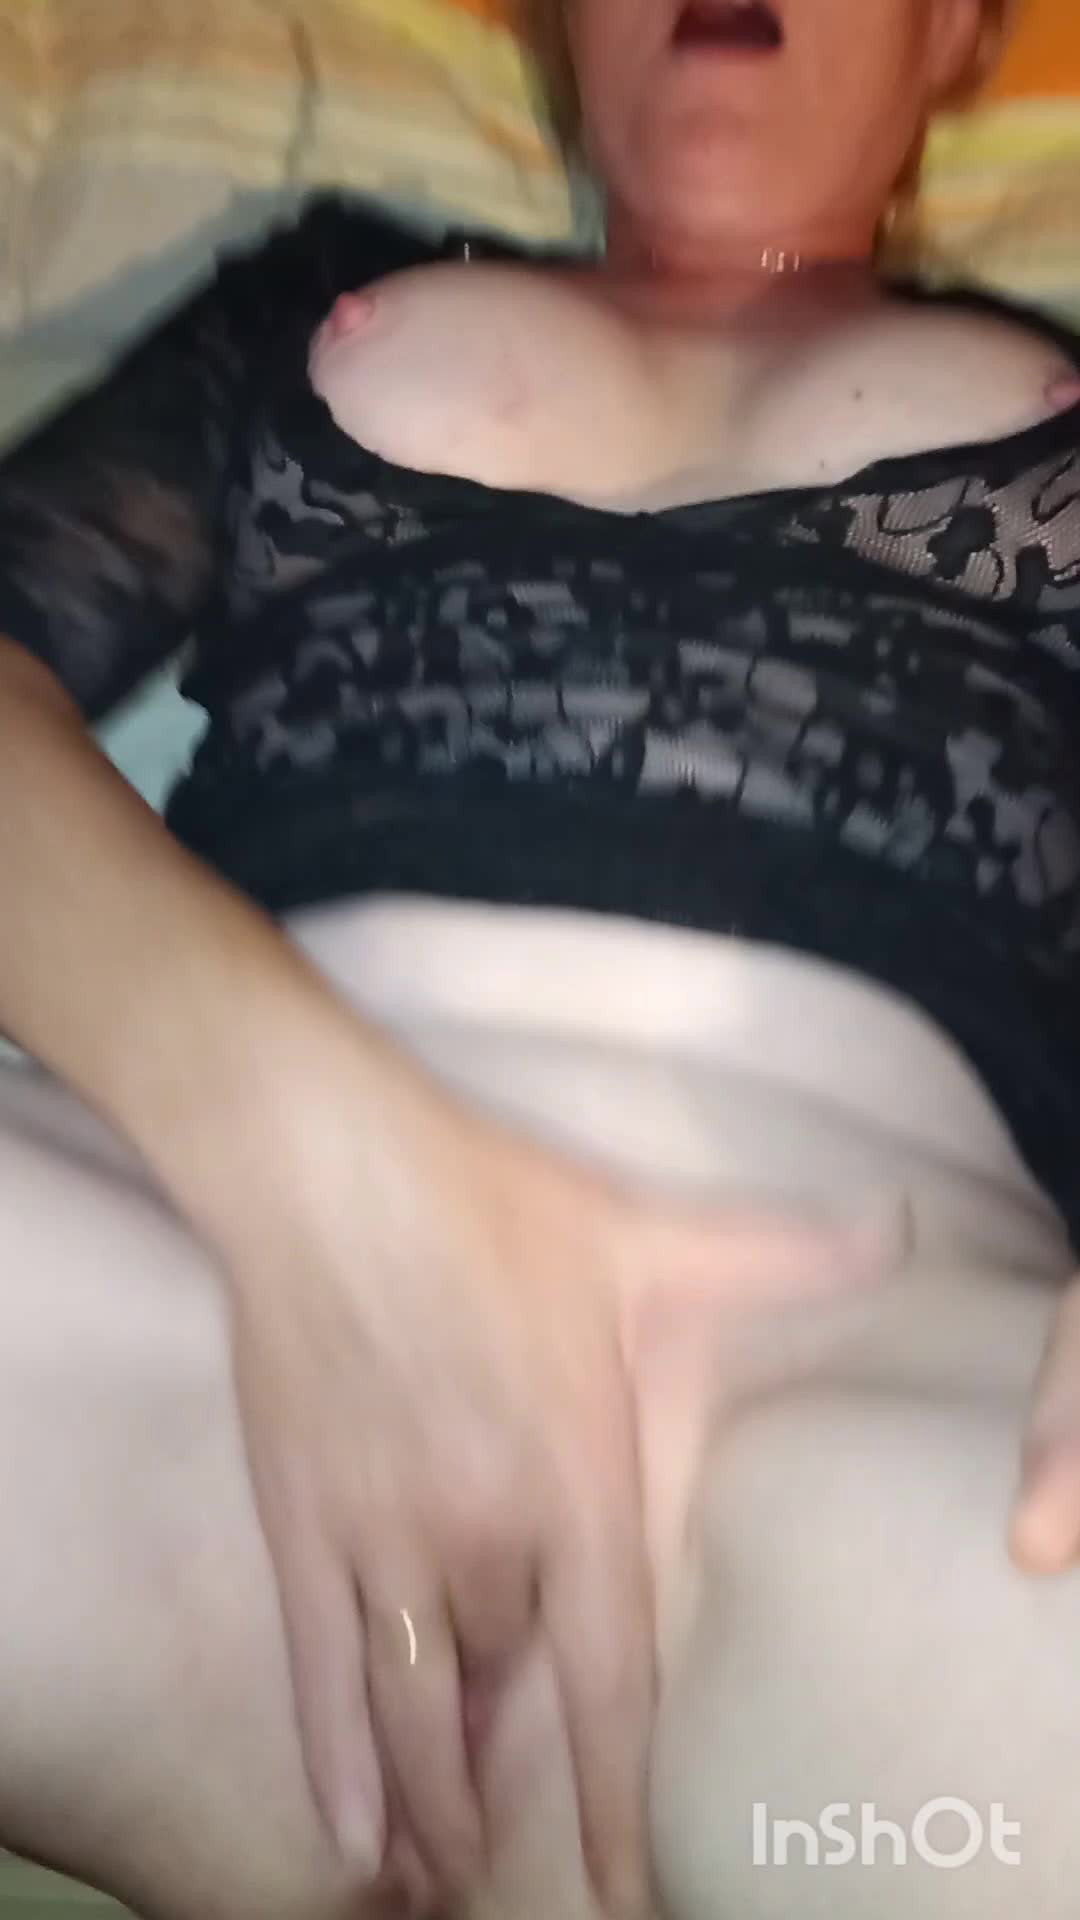 Video post by Molli21